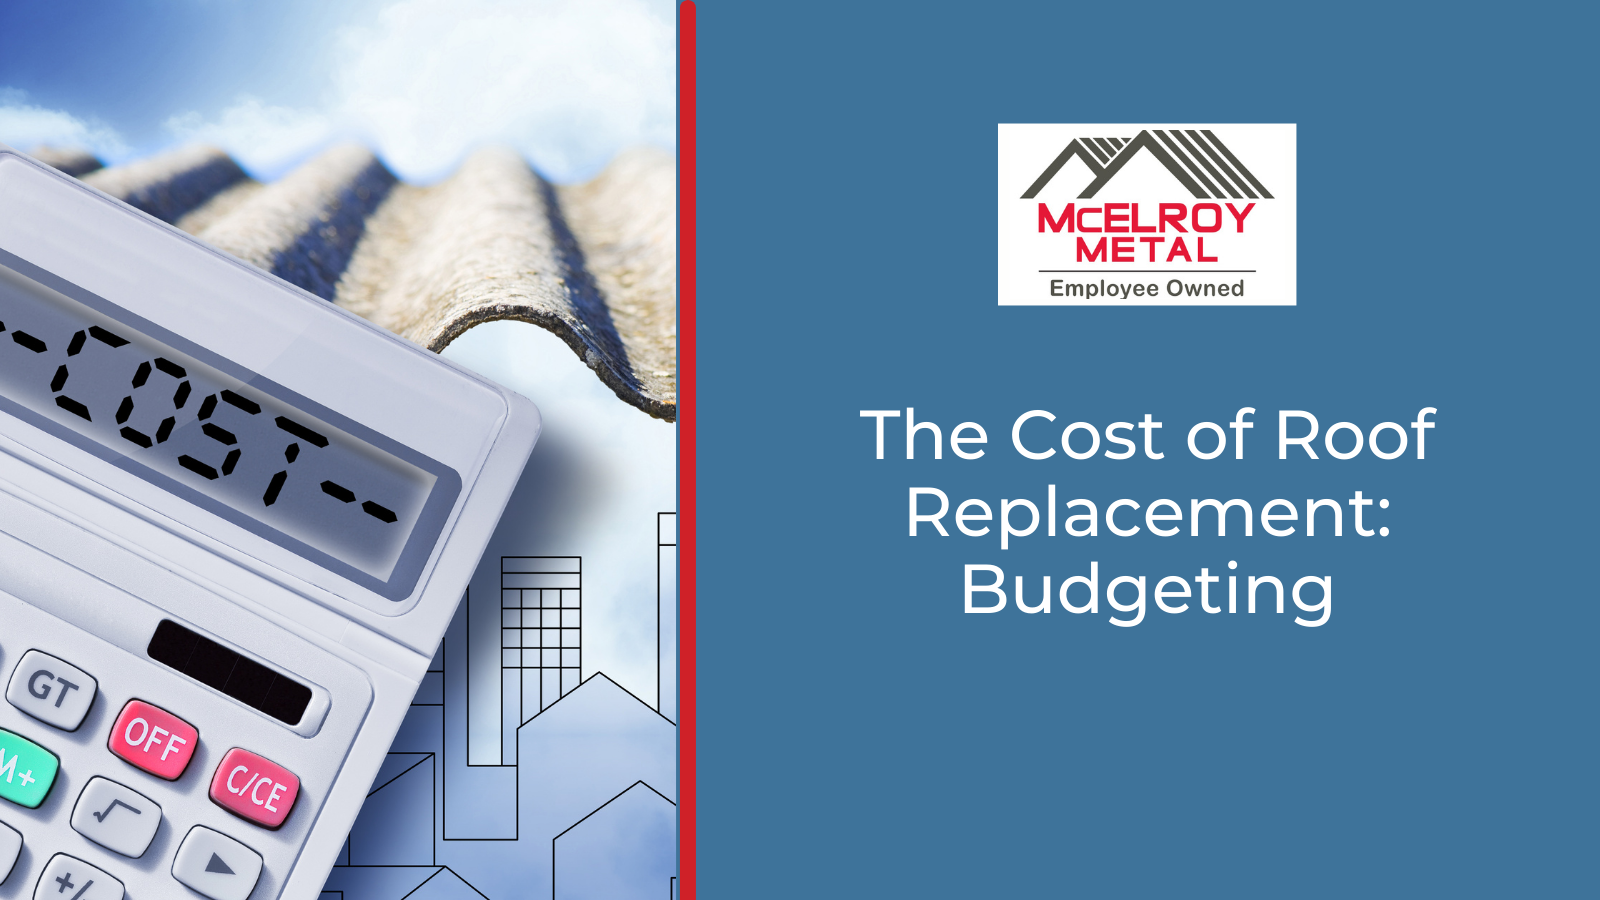 The Cost of Roof Replacement: Budgeting